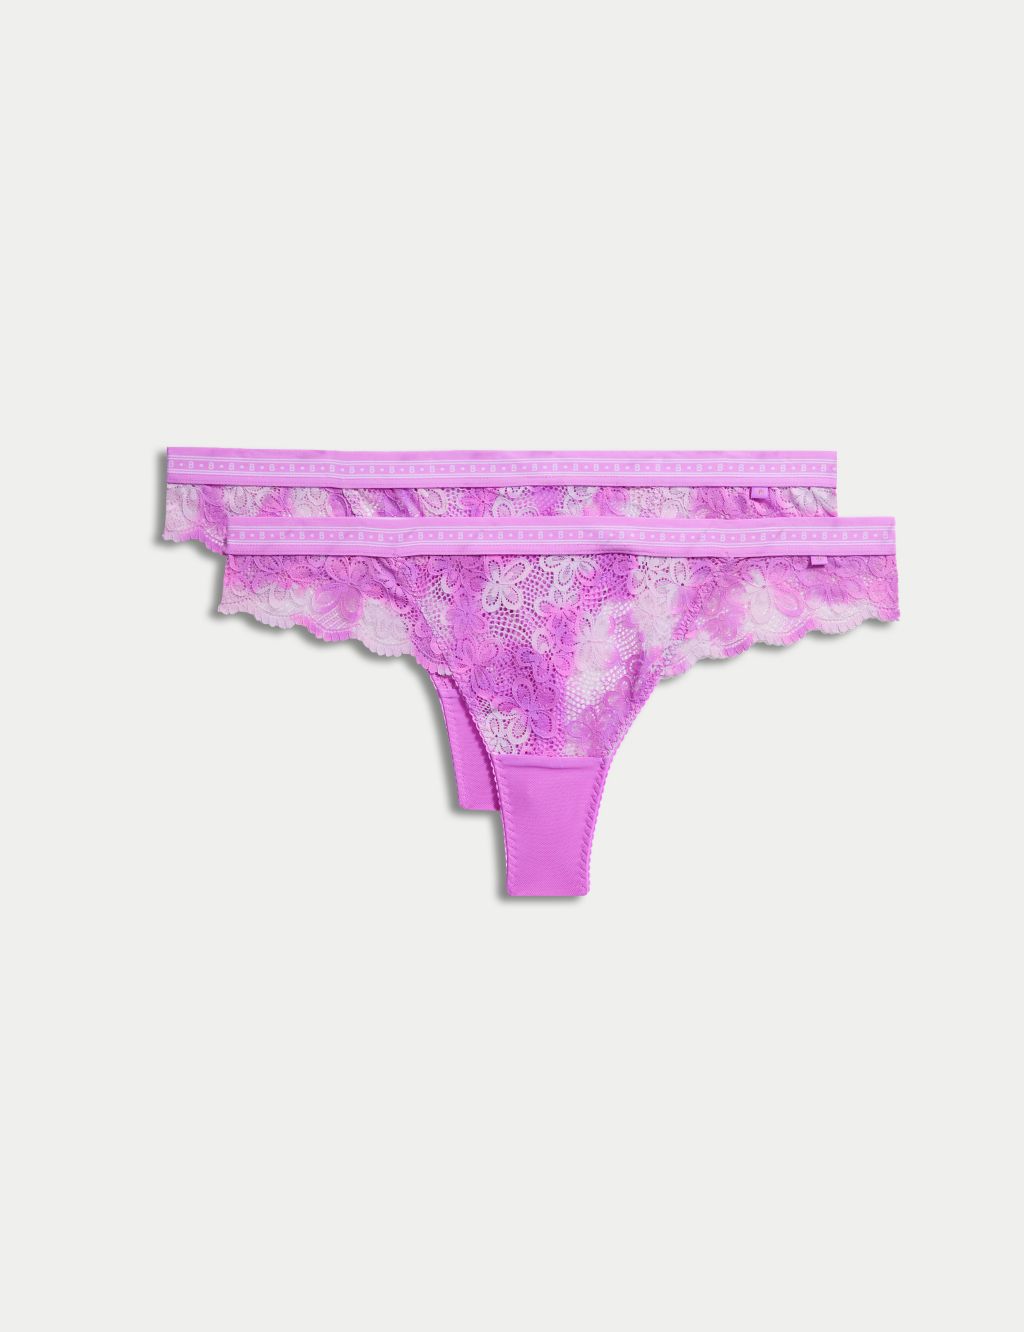 Victoria's Secret Pink Crushed Velvet Thong Panty/Underwear Color Neon Pink  Size X-Small New : Clothing, Shoes & Jewelry 